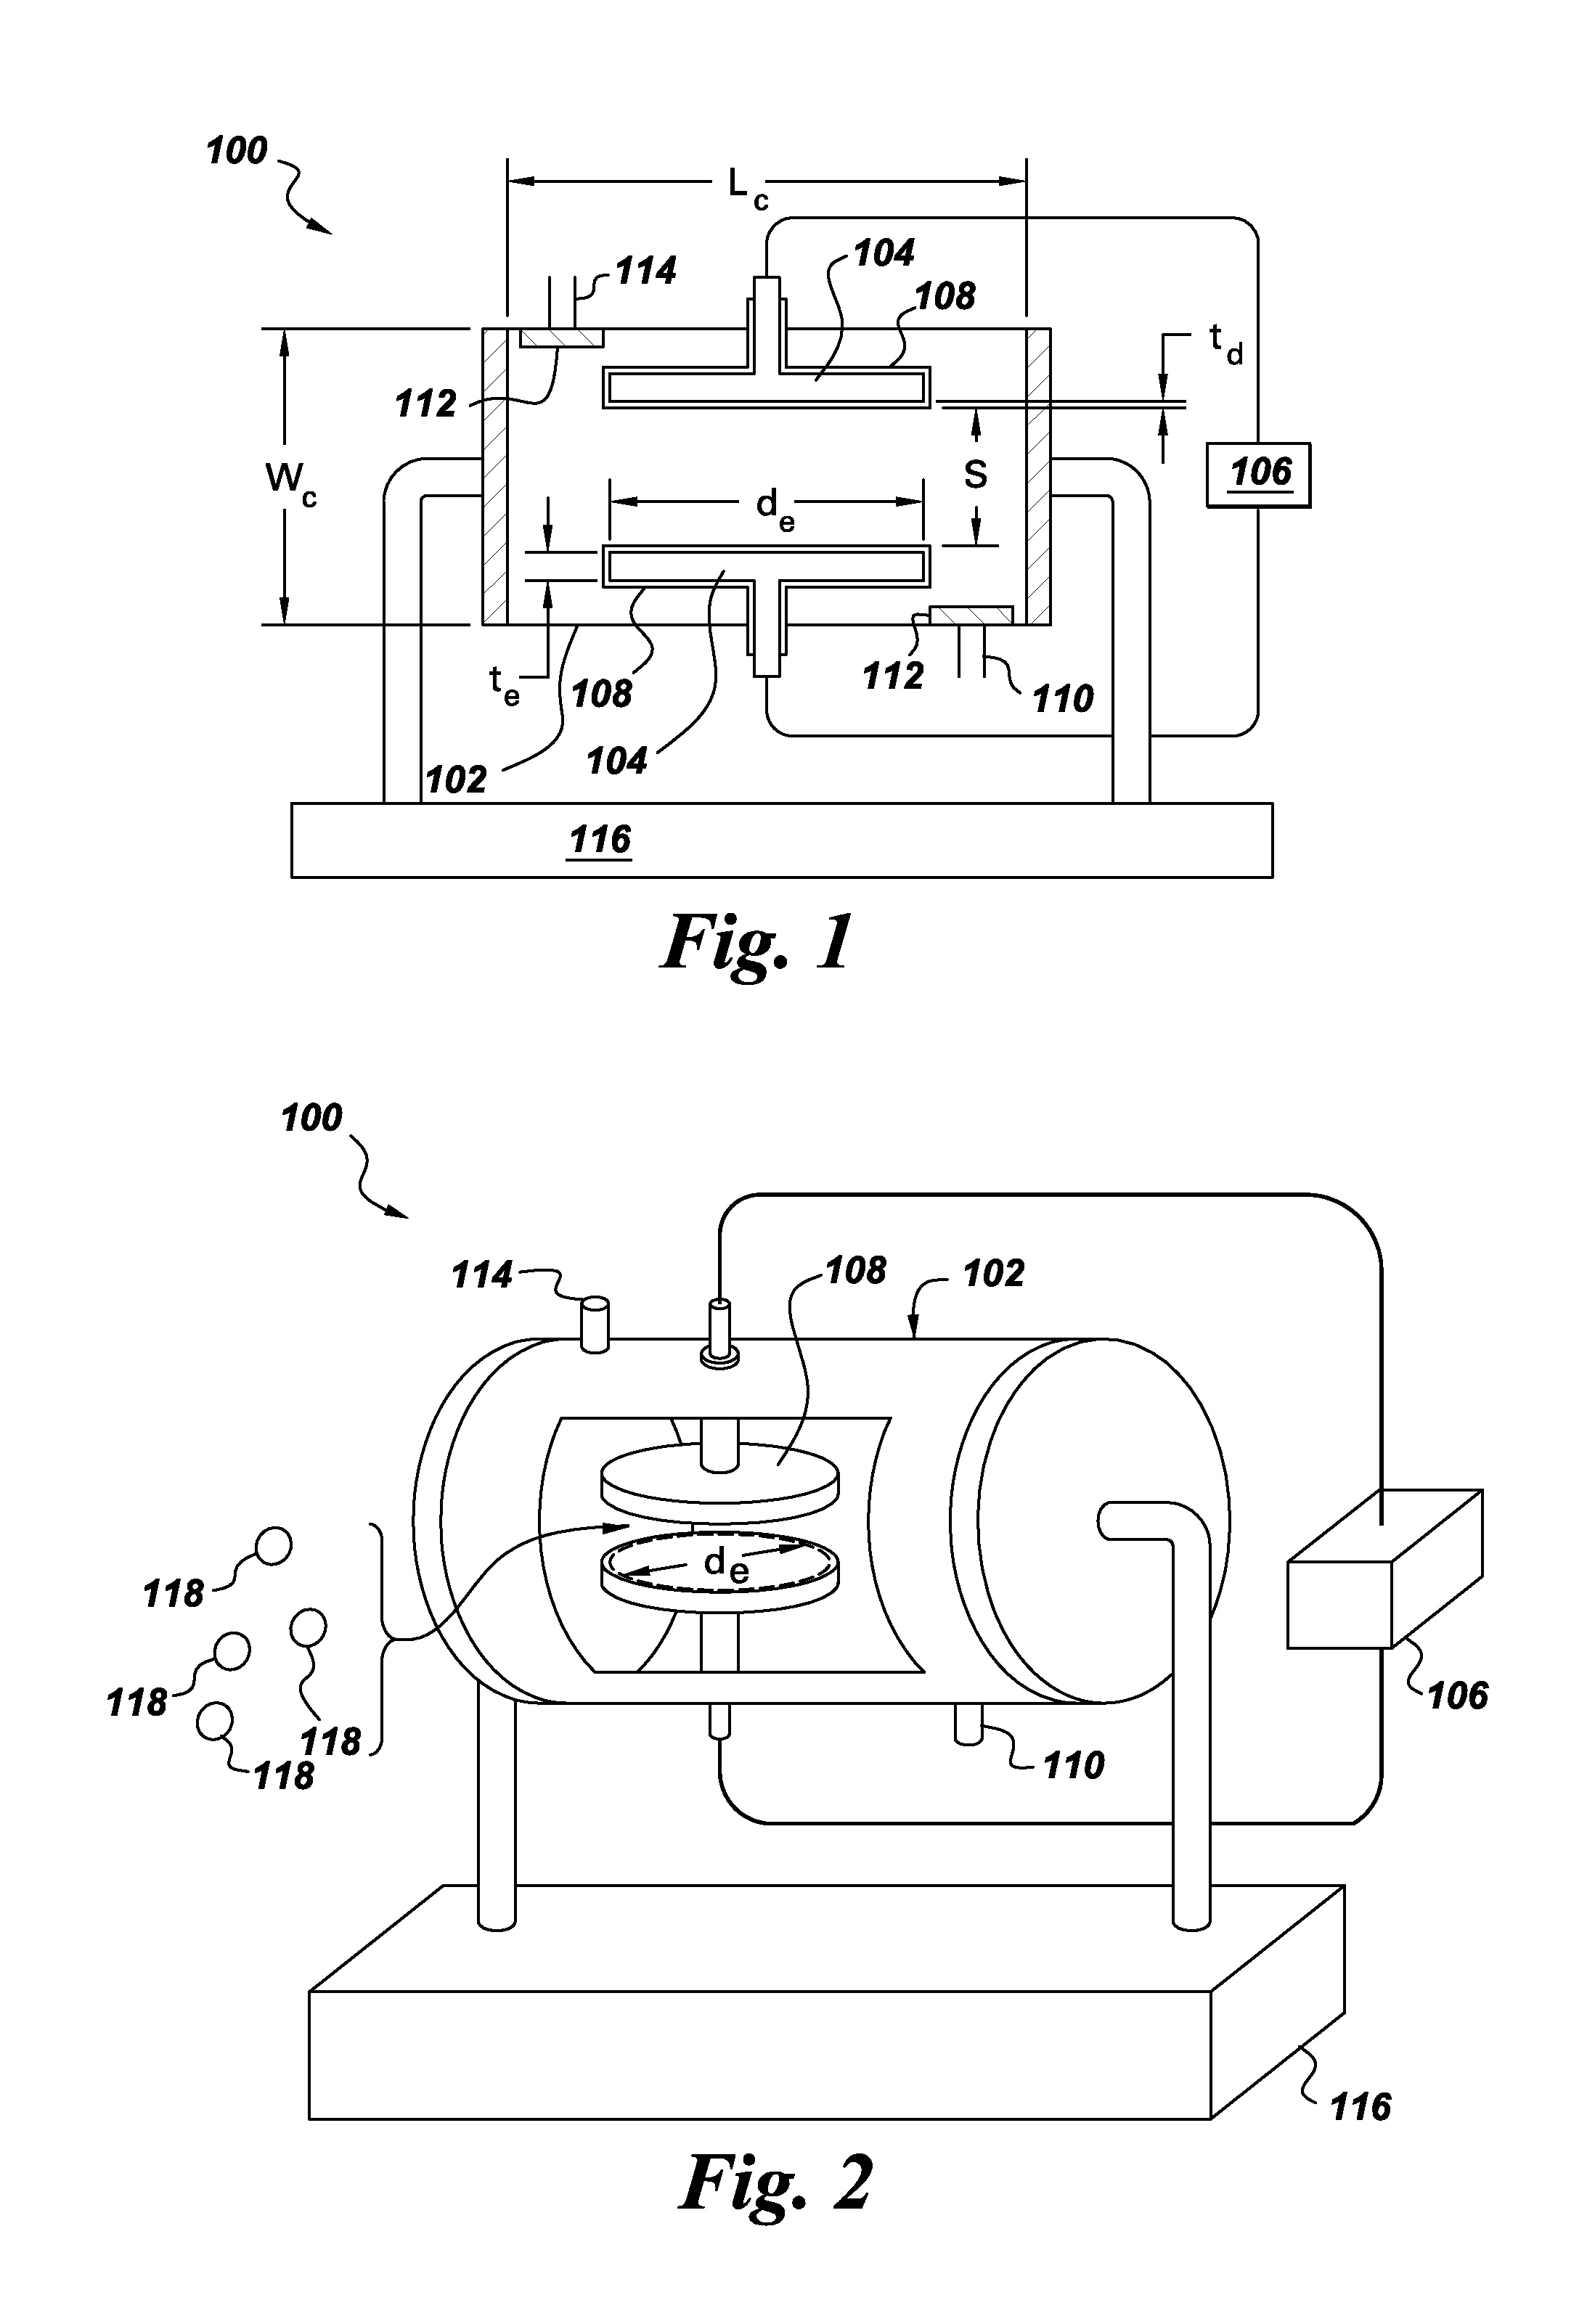 Apparatus and method for producing plasma during milling for processing of material compositions